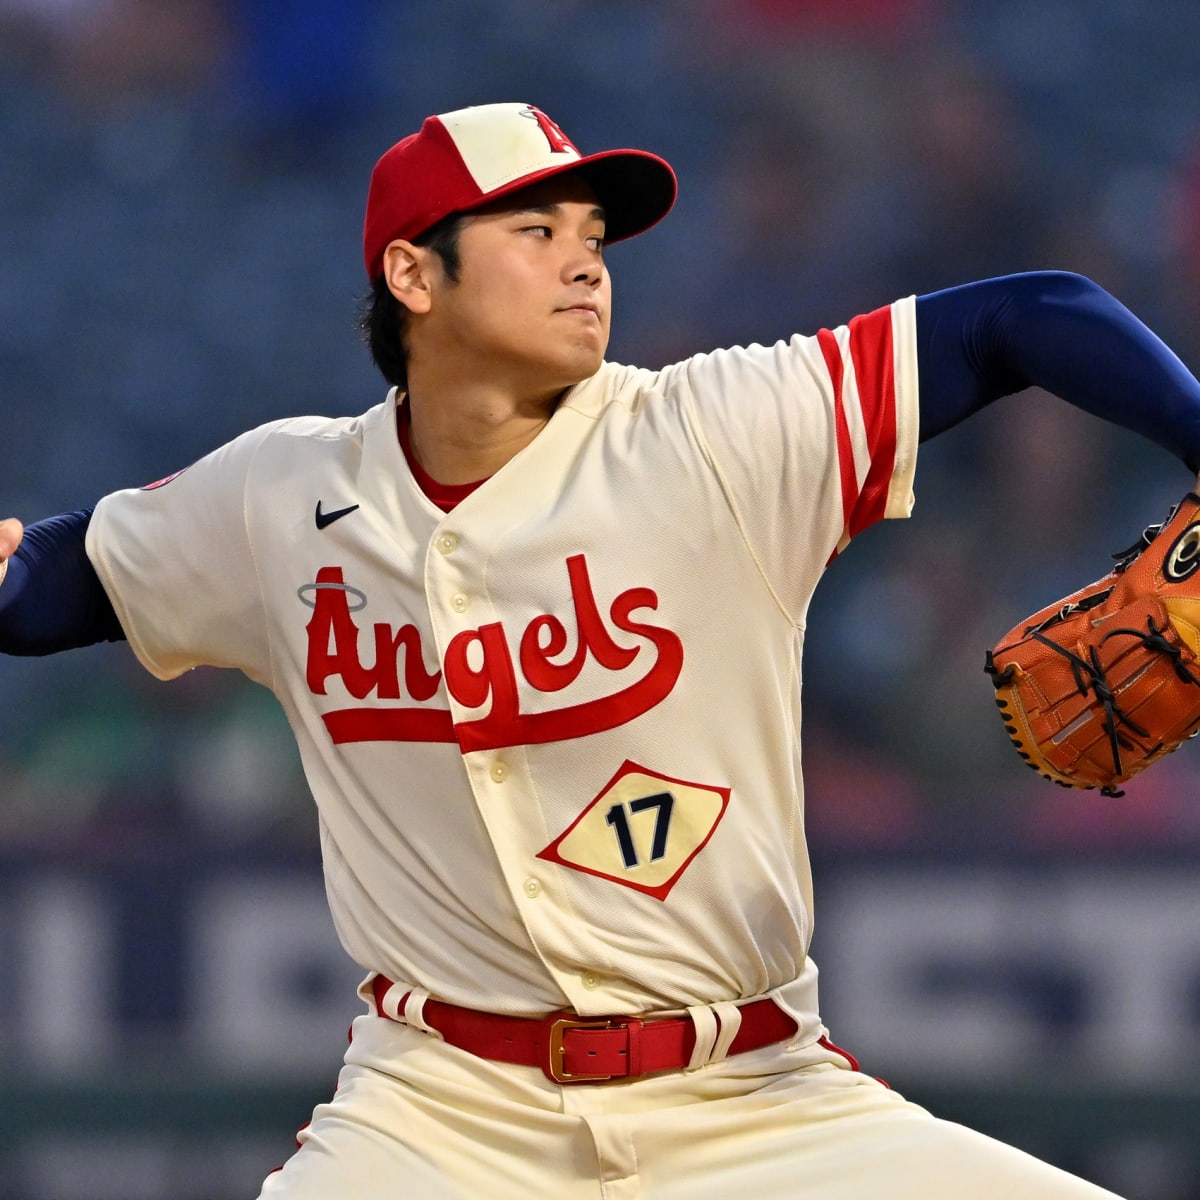 Somewhat talented Shohei Ohtani strikes out Mike Trout to win WBC